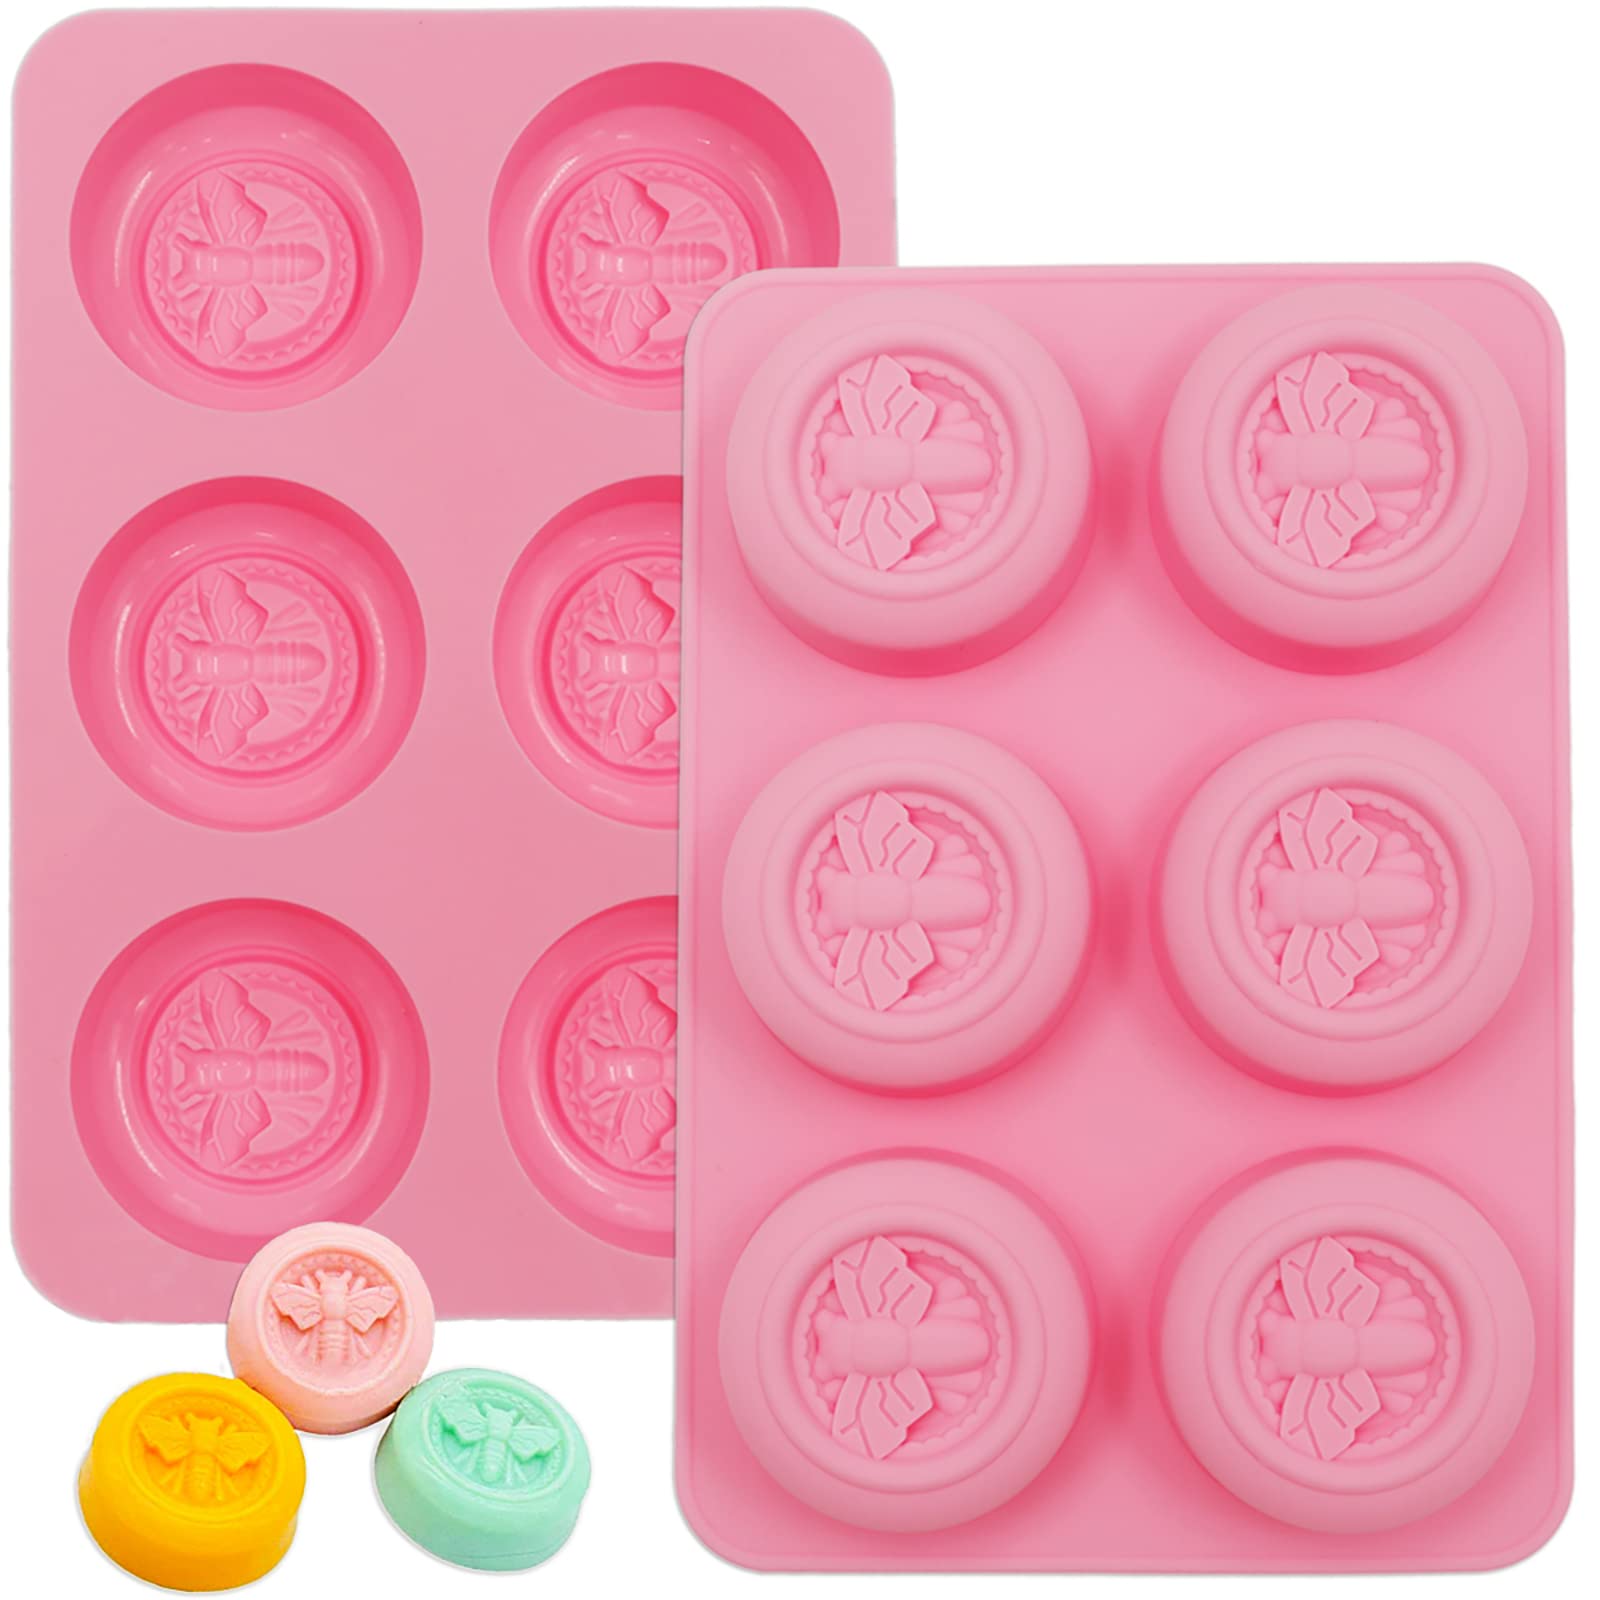 9 Cavity Soap Molds Silicone Mold for Making Handmade Soap Lotion